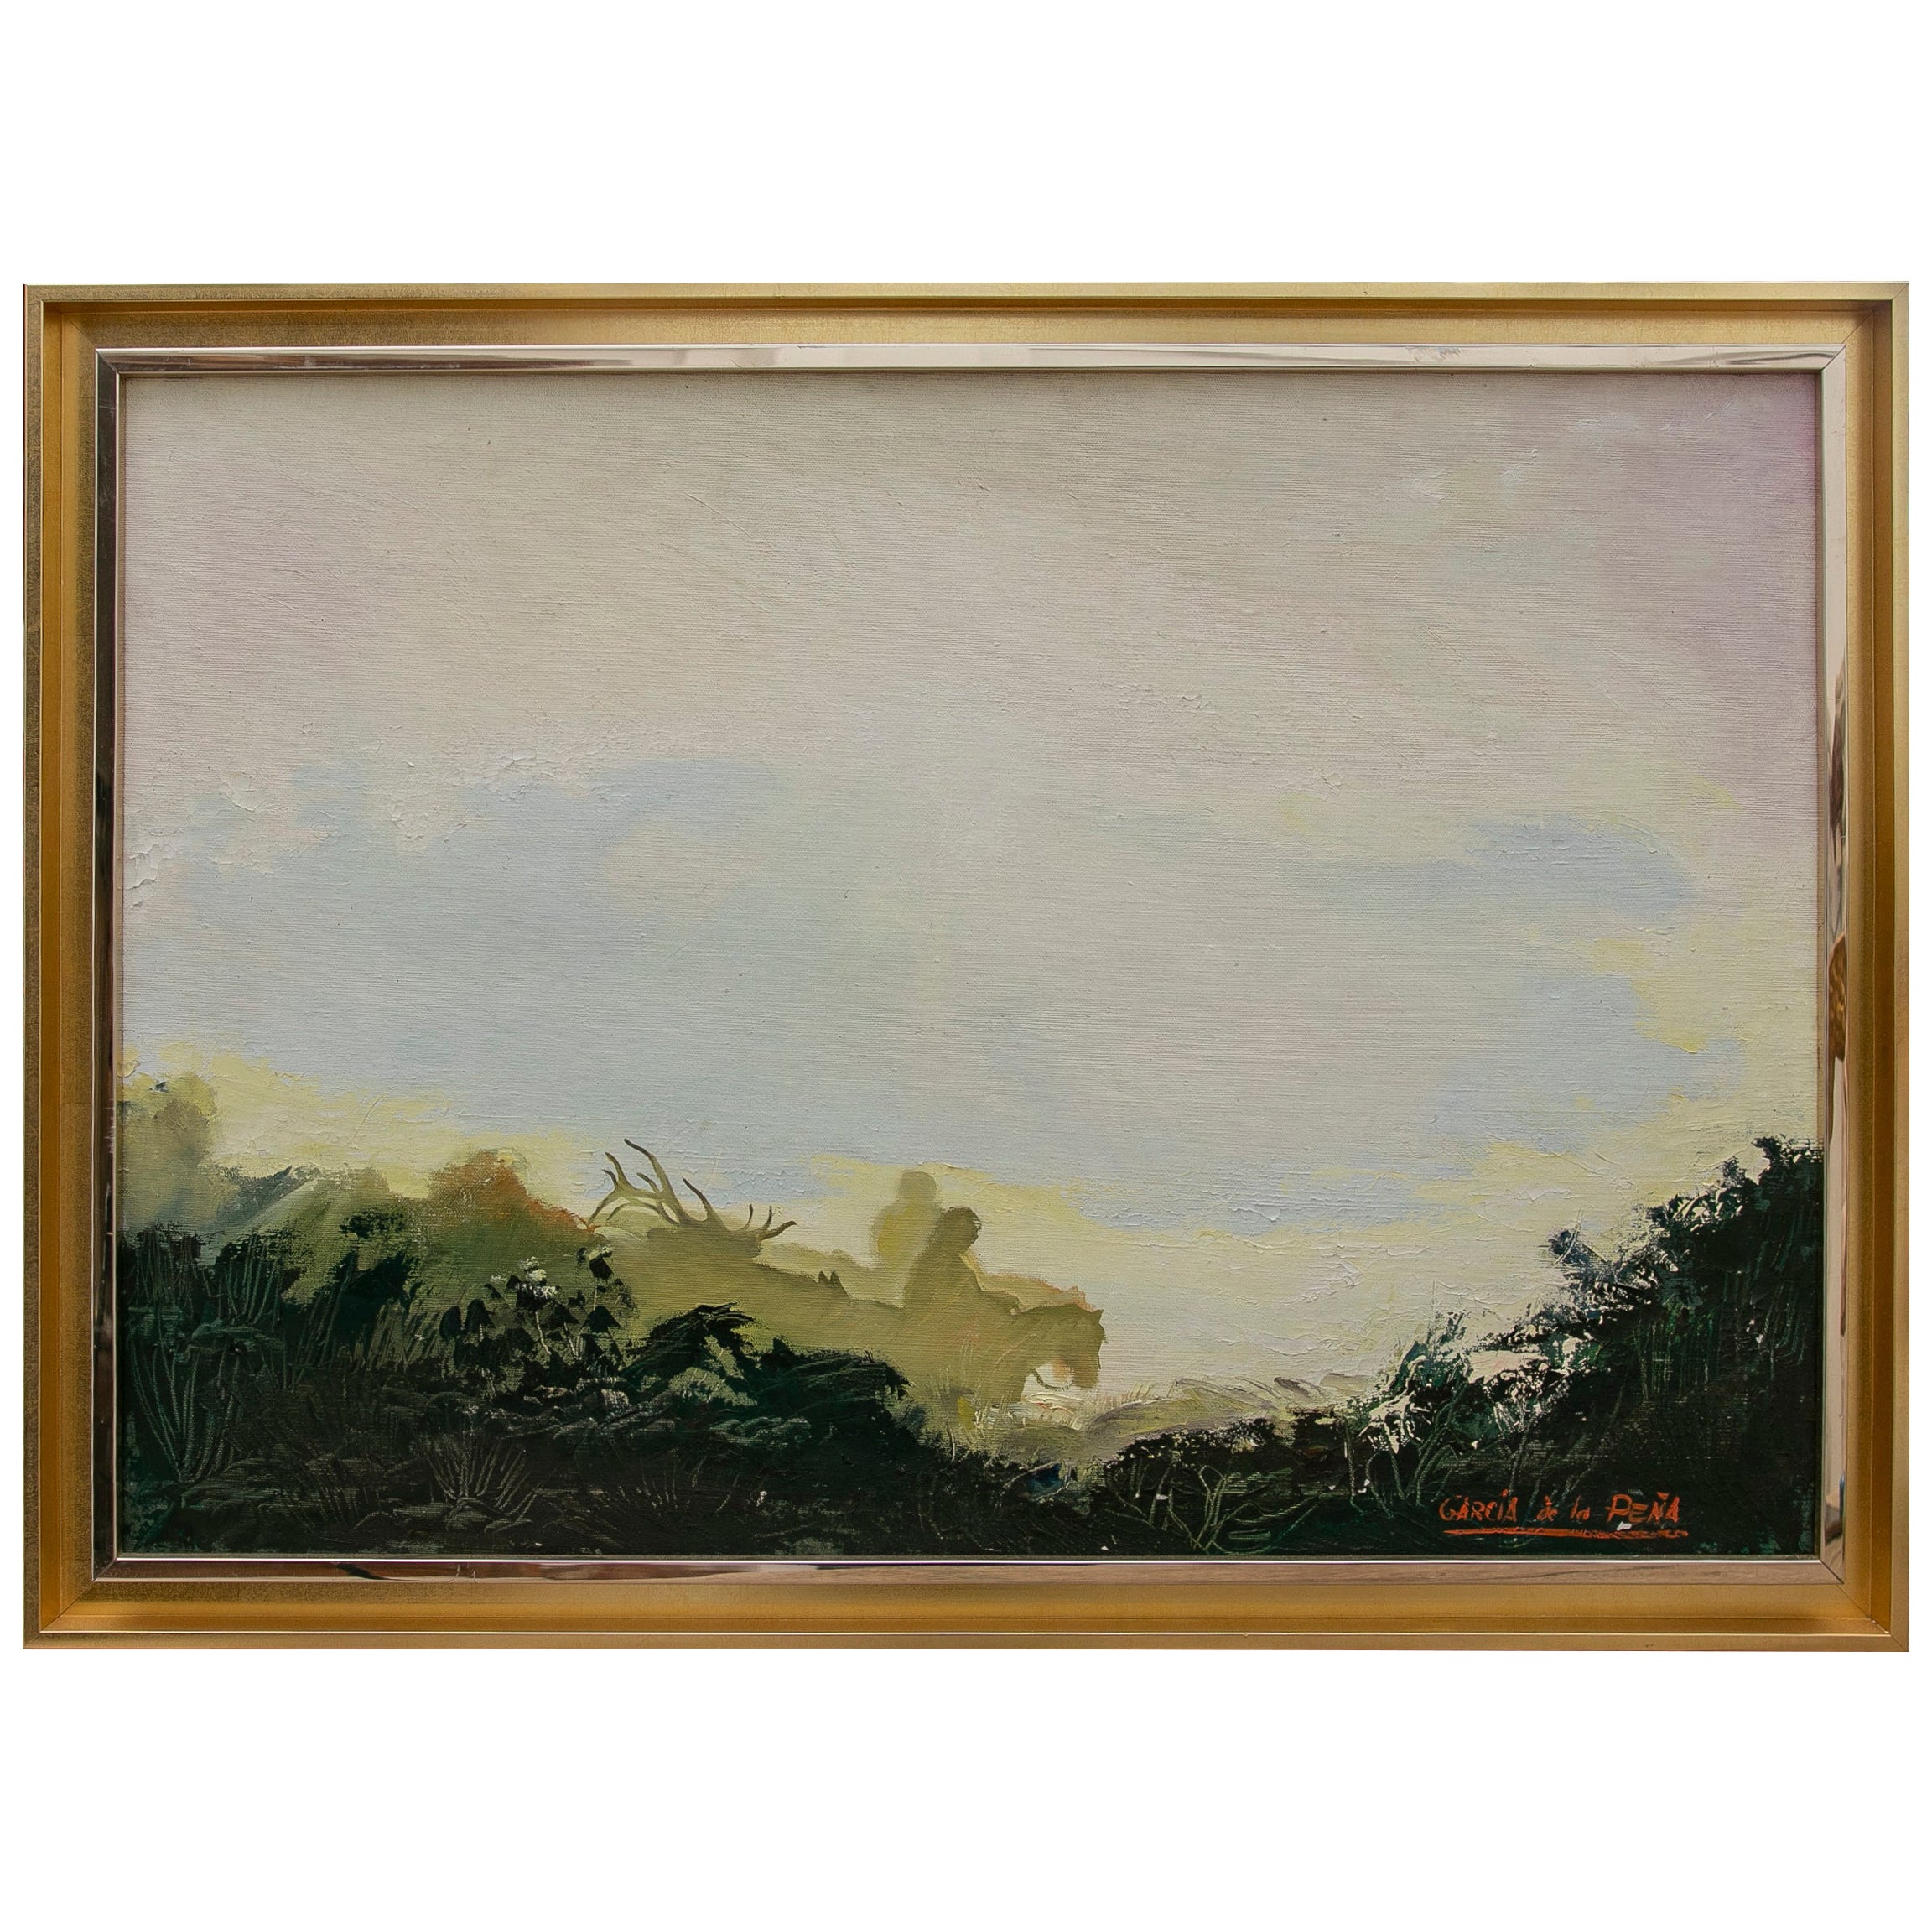 Oil Painting on Canvas by Garcia de la Peña with Landscape and Horse For Sale